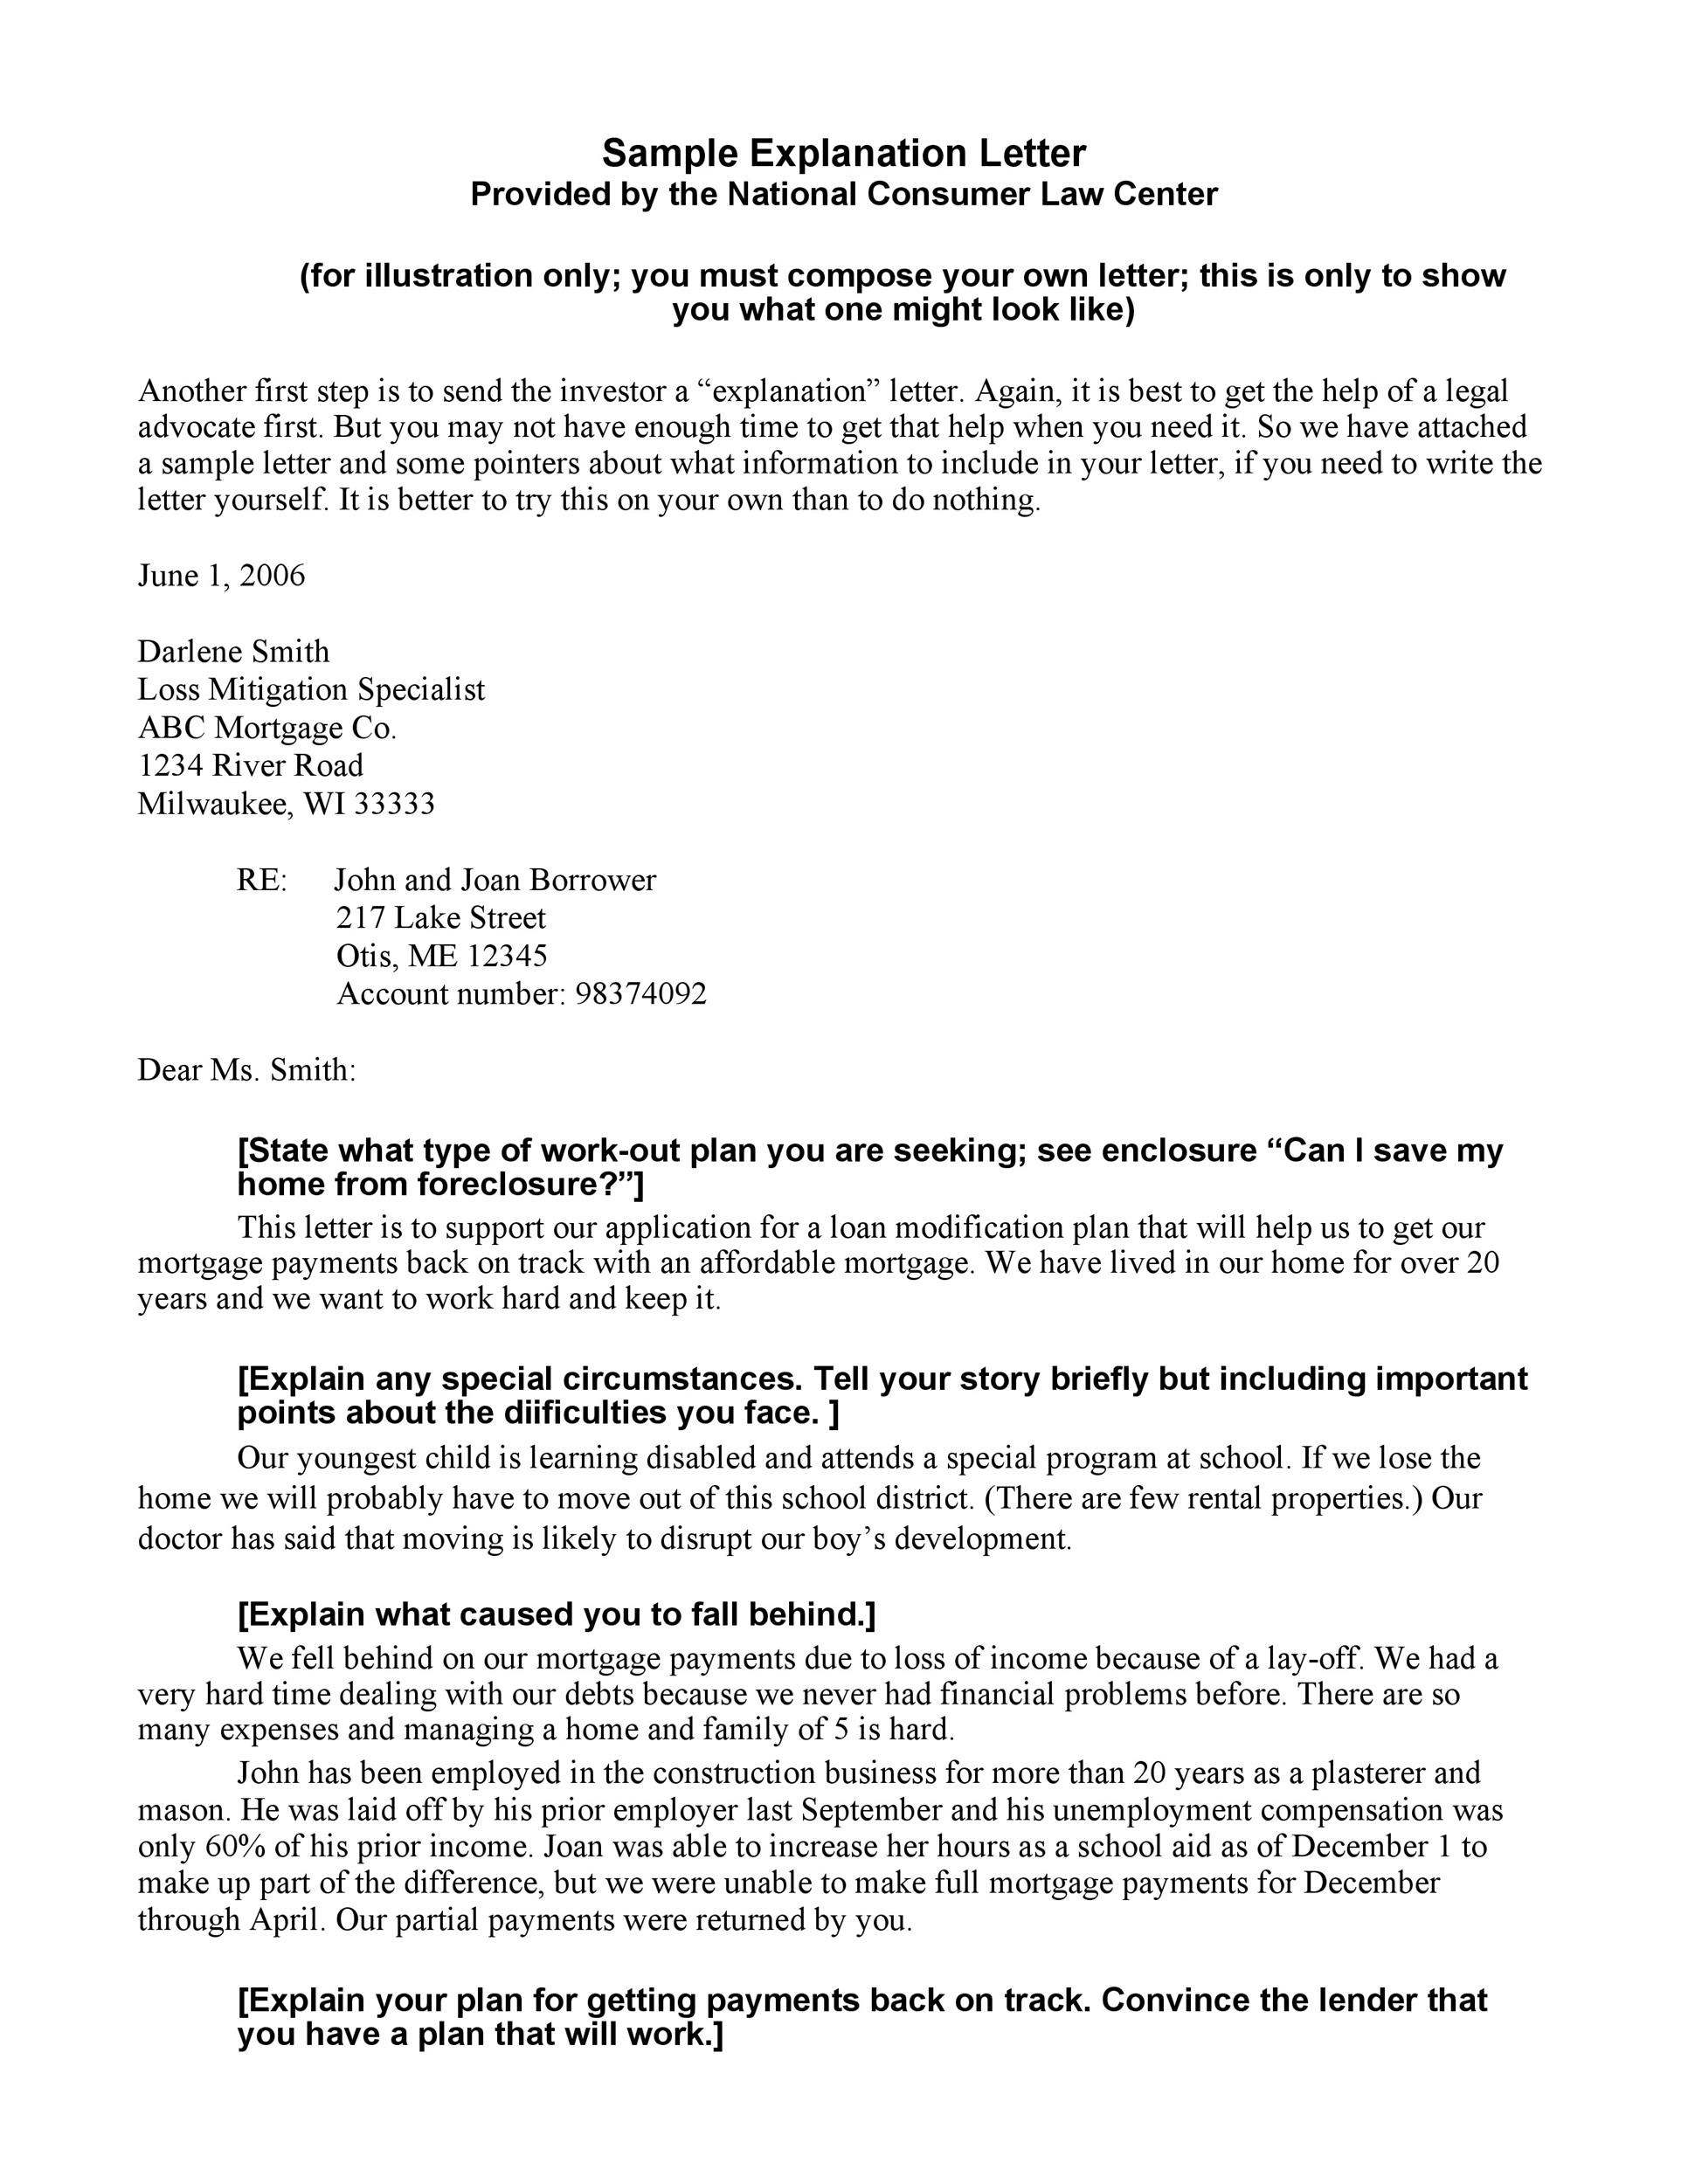 Letter To Underwriter Explanation Sample from templatelab.com